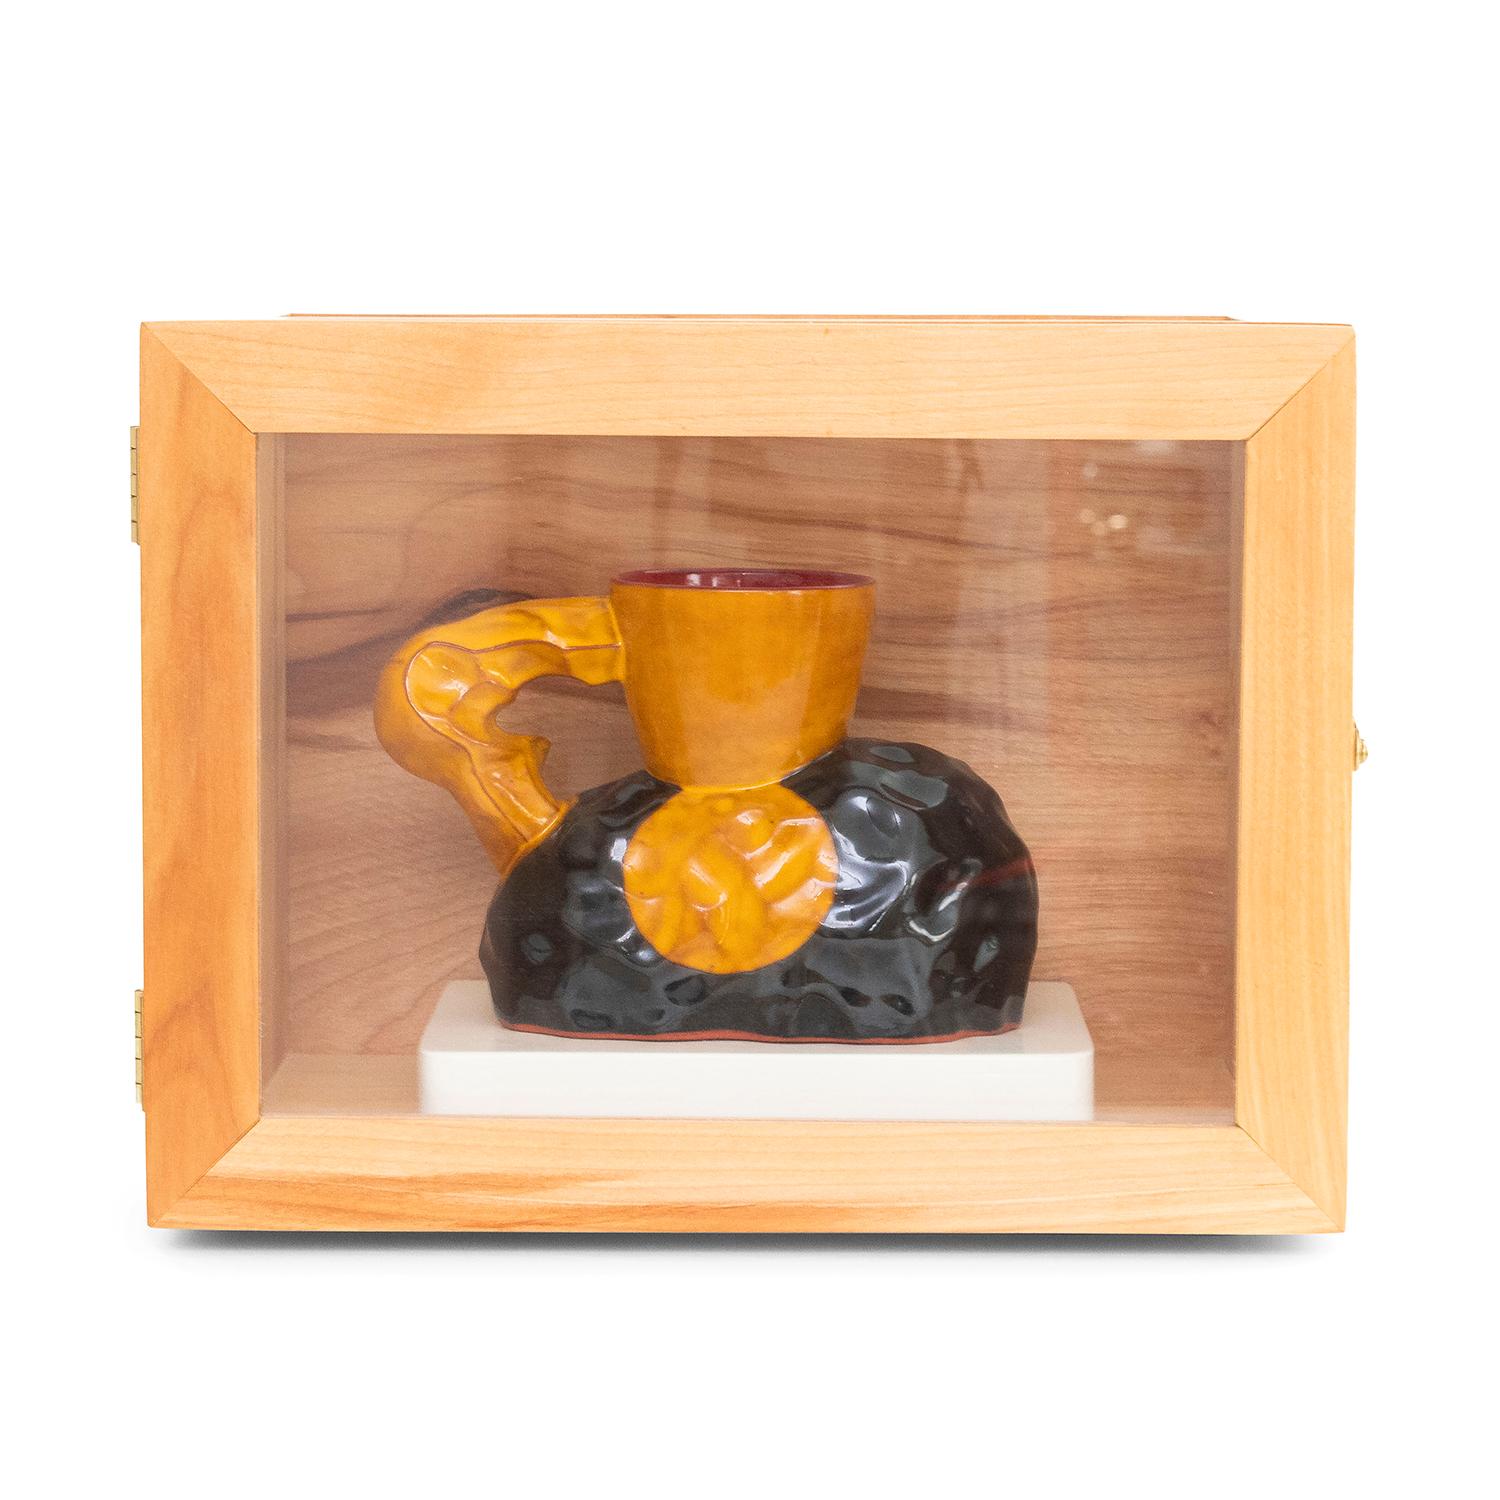 Ken Price 
California Cup (INV# NP5005)
glazed earthenware
cup: 4.19 x 6 x 3"
handmade wooden box: 8 x 10.38 x 5.63"
1991
#18/25
signed, dated, and numbered
provenance The Nevica Project
provenance Gemini GEL 

Ken Price (1935 - 2012) received a BFA